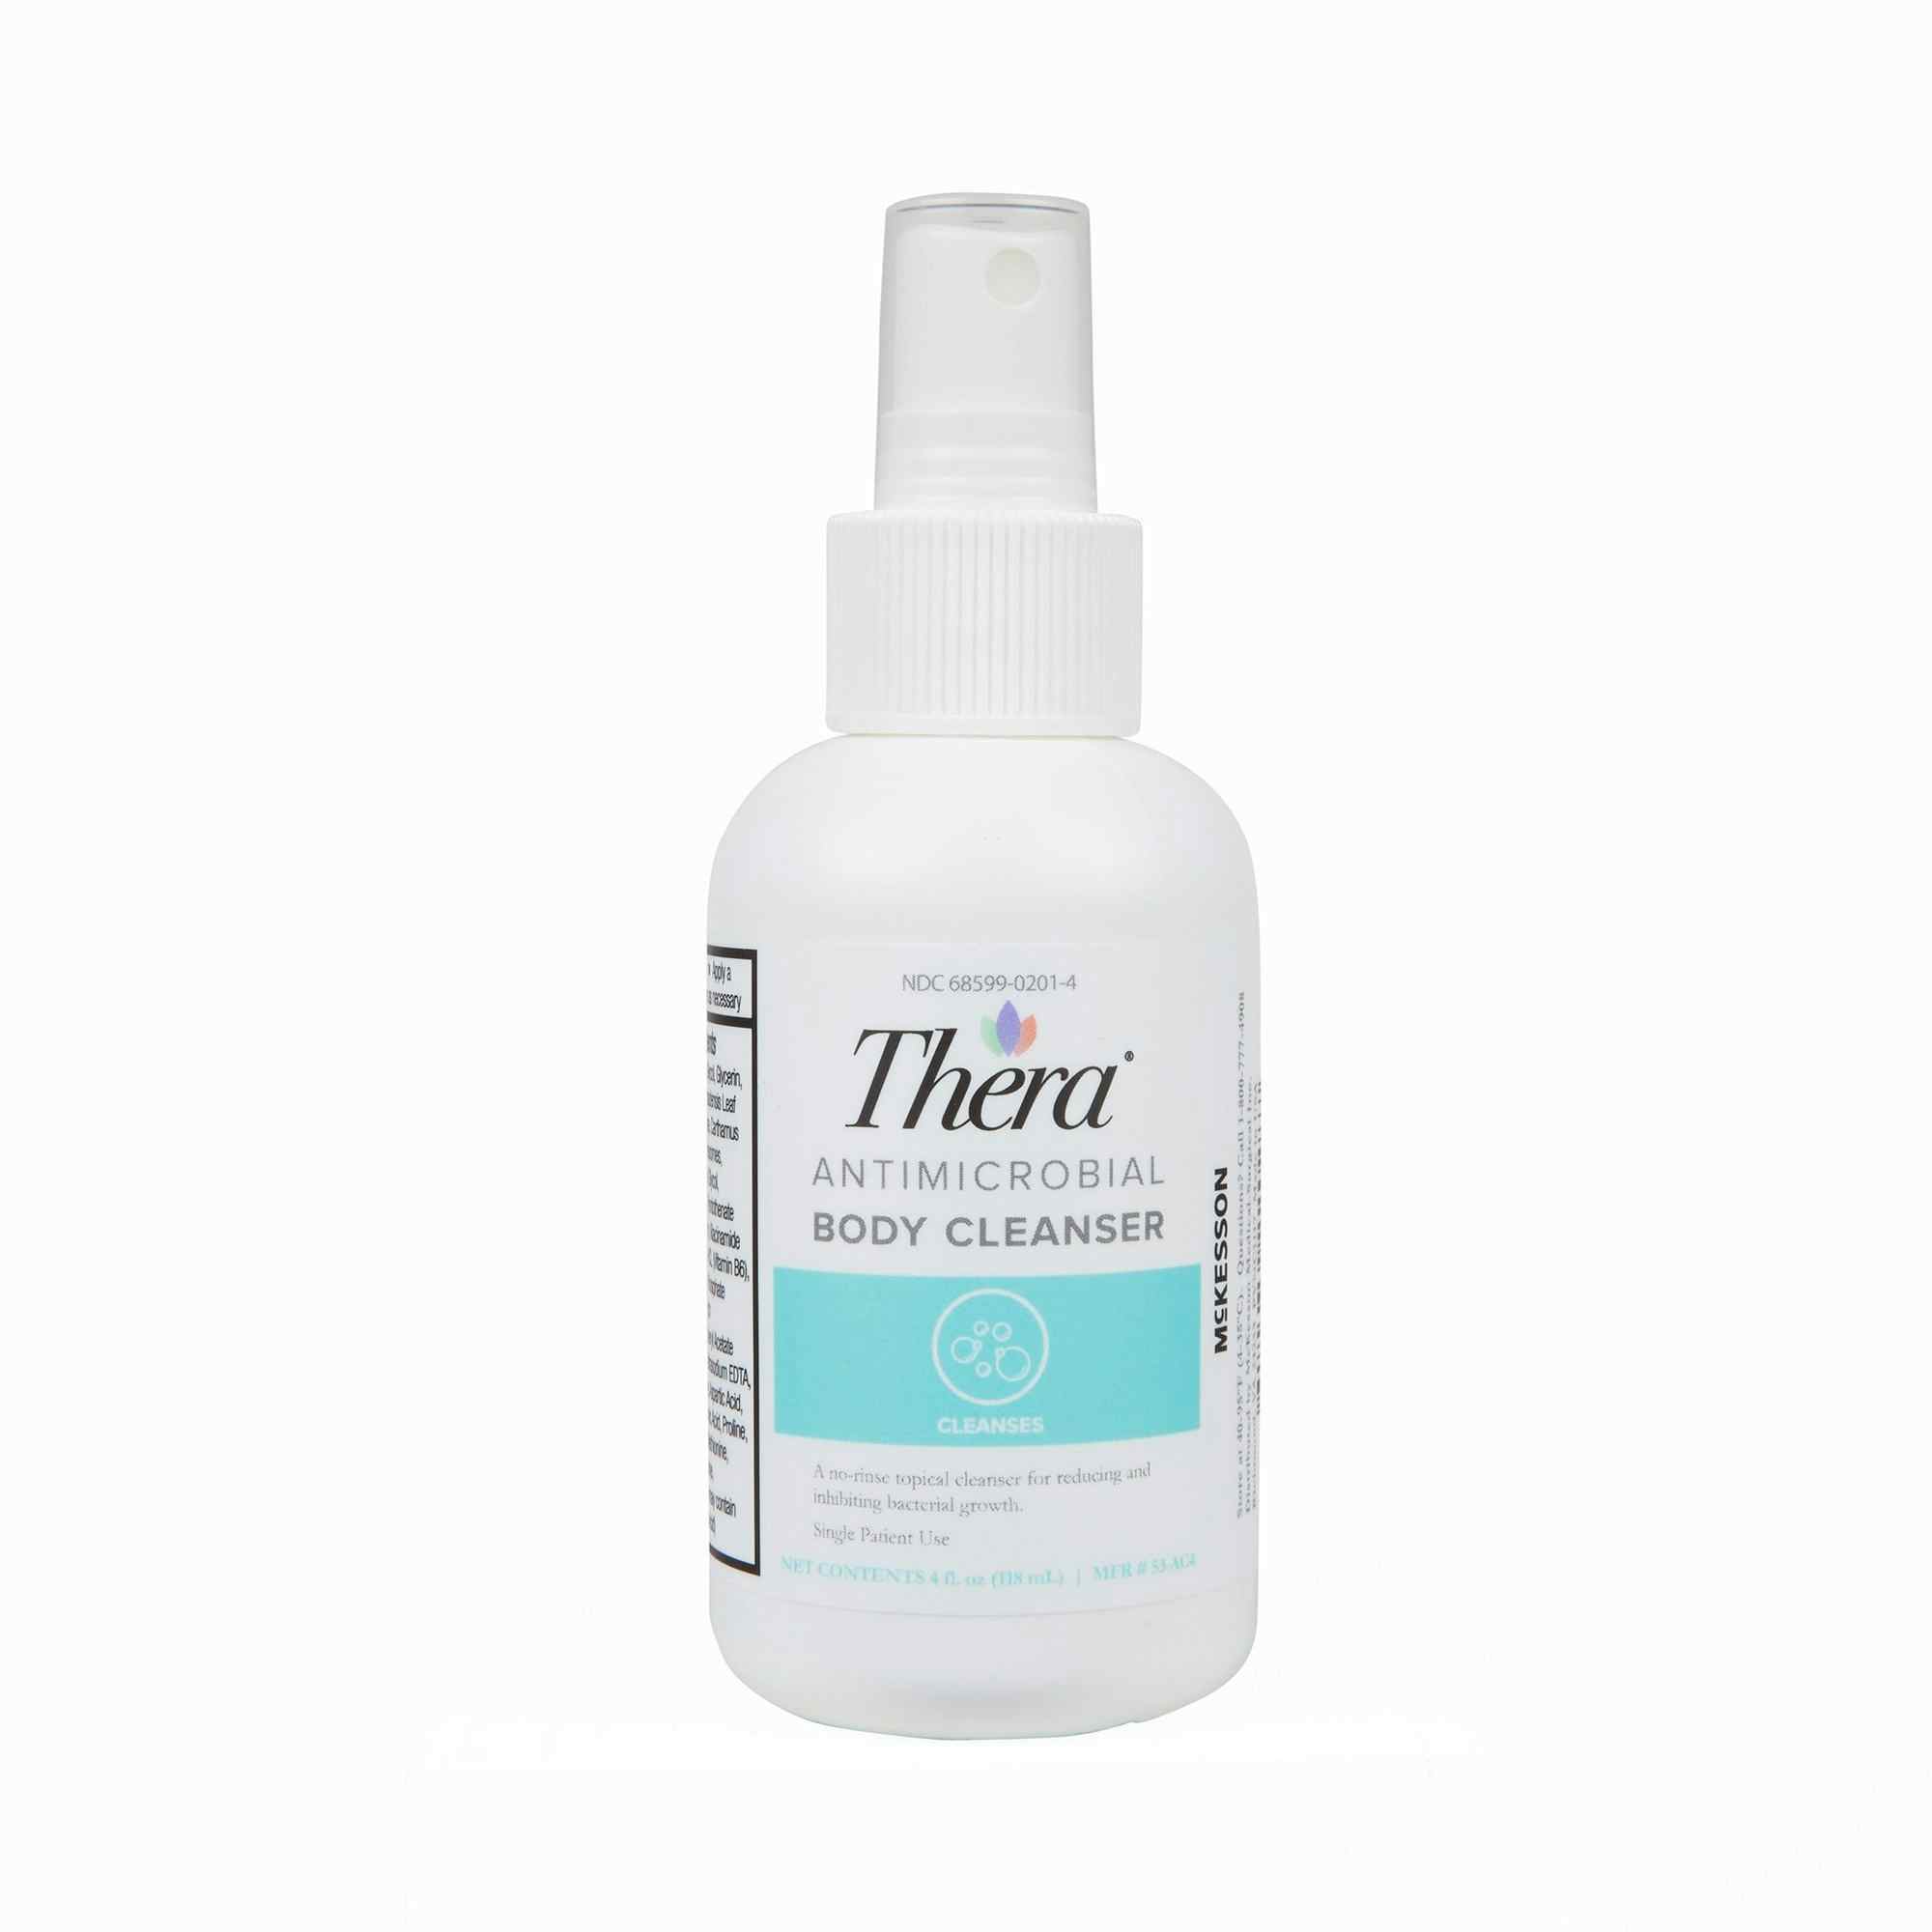 Thera Antimicrobial Body Wash, Scented, 53-AC4, 4 oz. - 1 Bottle